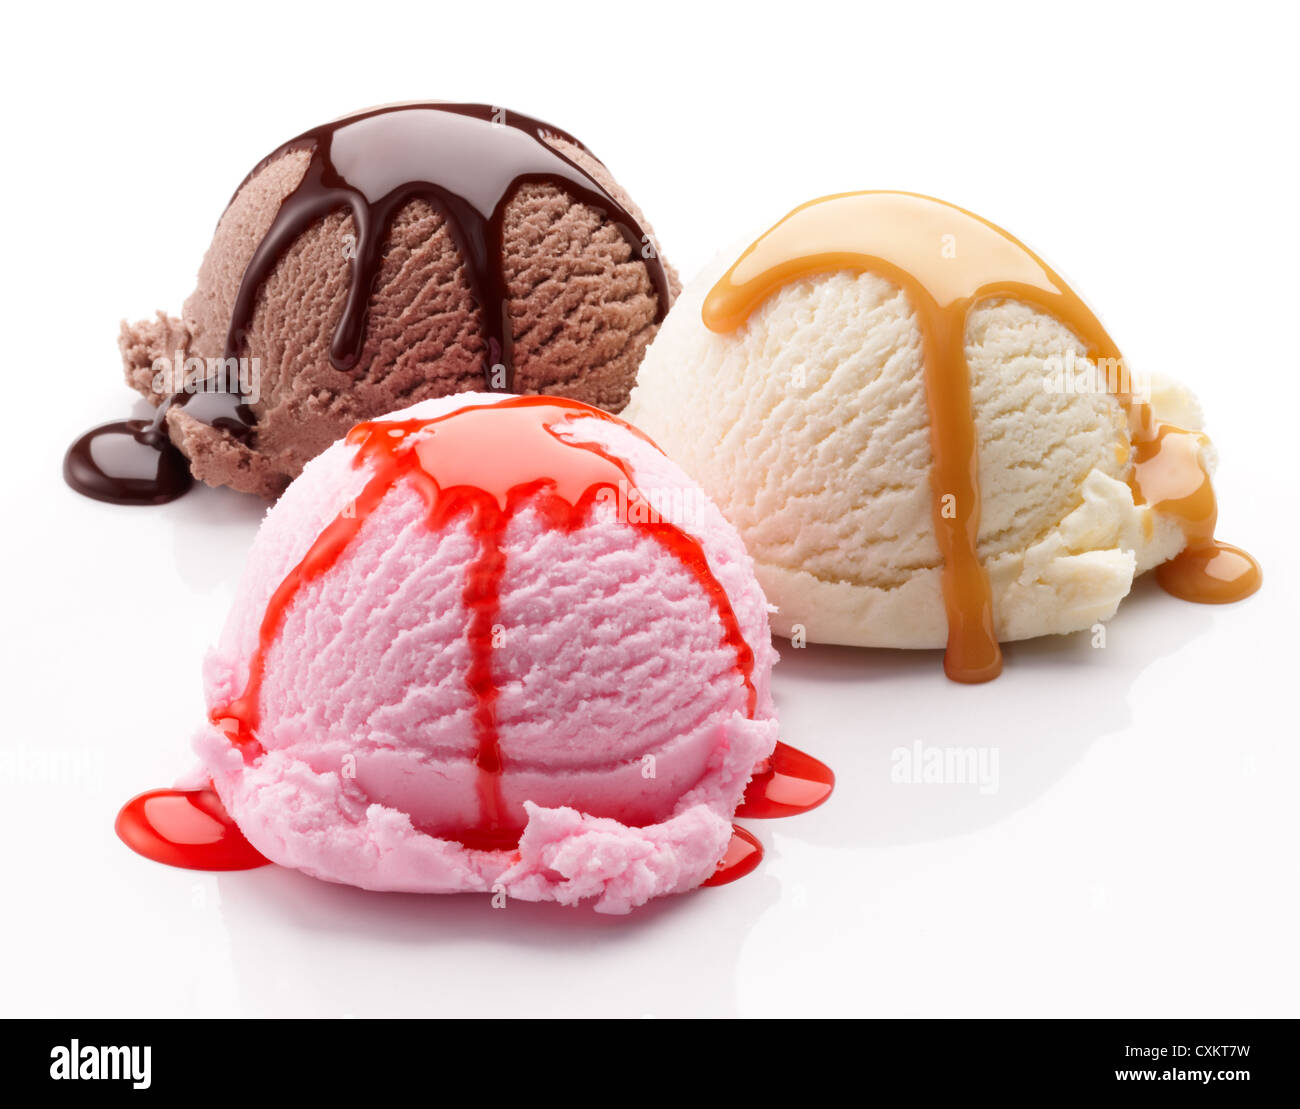 three scoops of ice cream with syrup Stock Photo